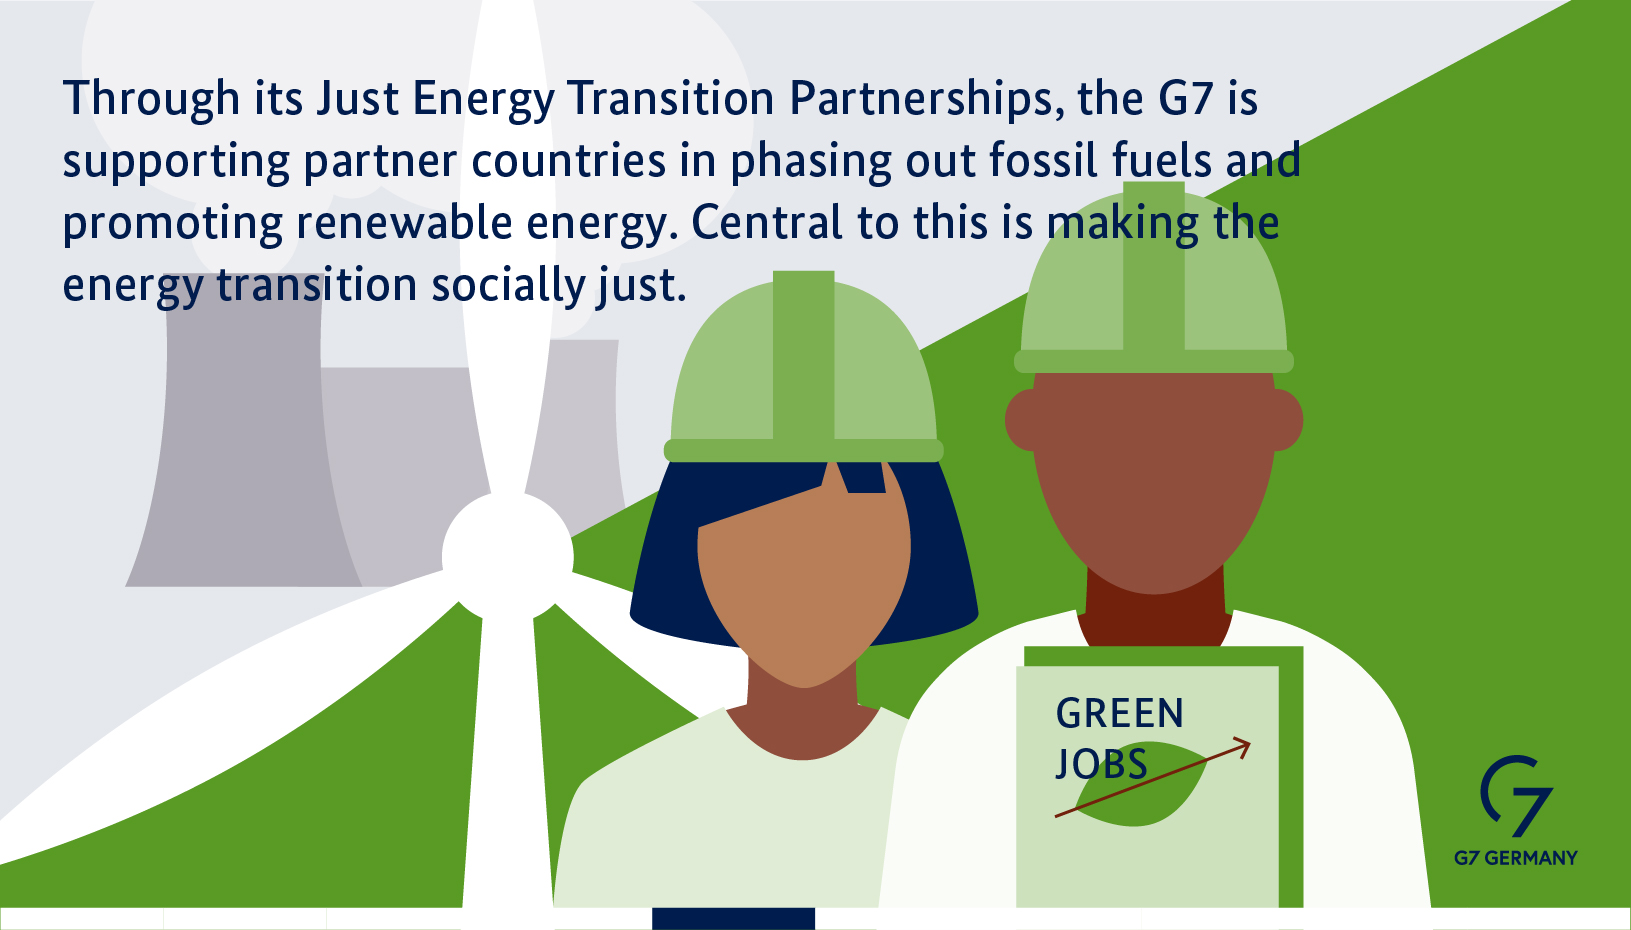 With its Just Energy Transition Partnerships, the G7 supports partner countries in phasing out coal and promoting investments in renewable energies. A socially just design of the energy transition is central to this.